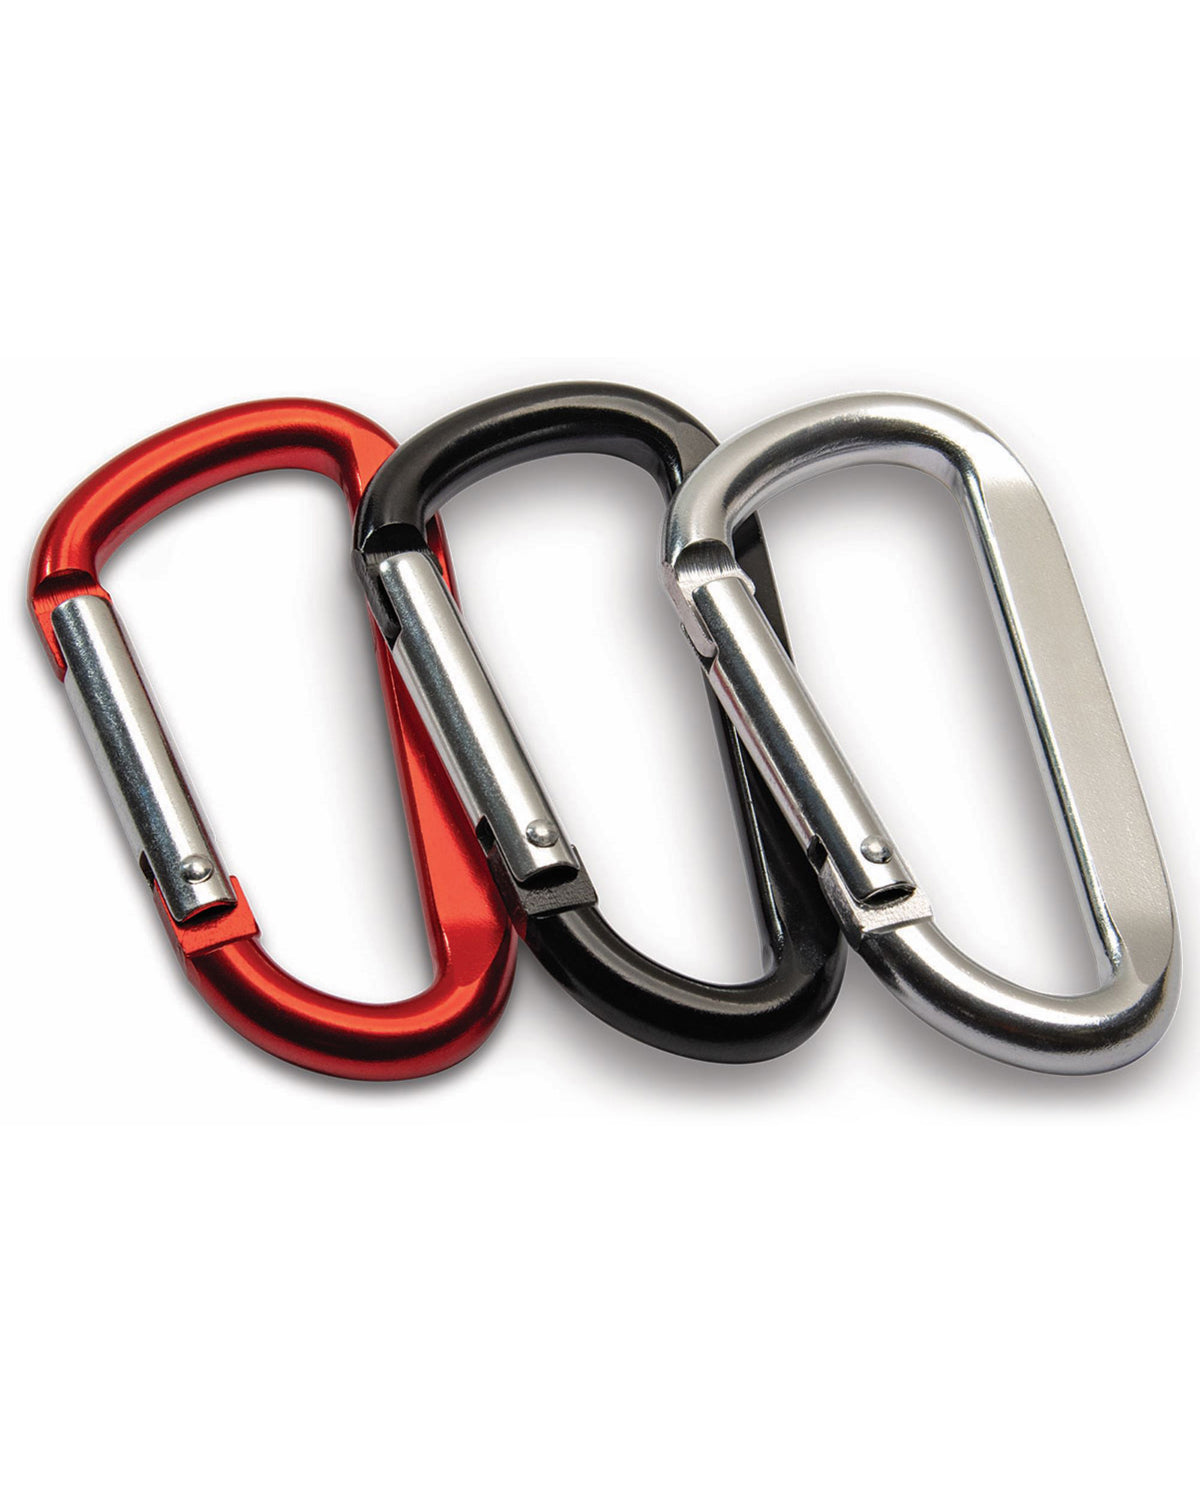 Carabiner Clips - Pack of Three